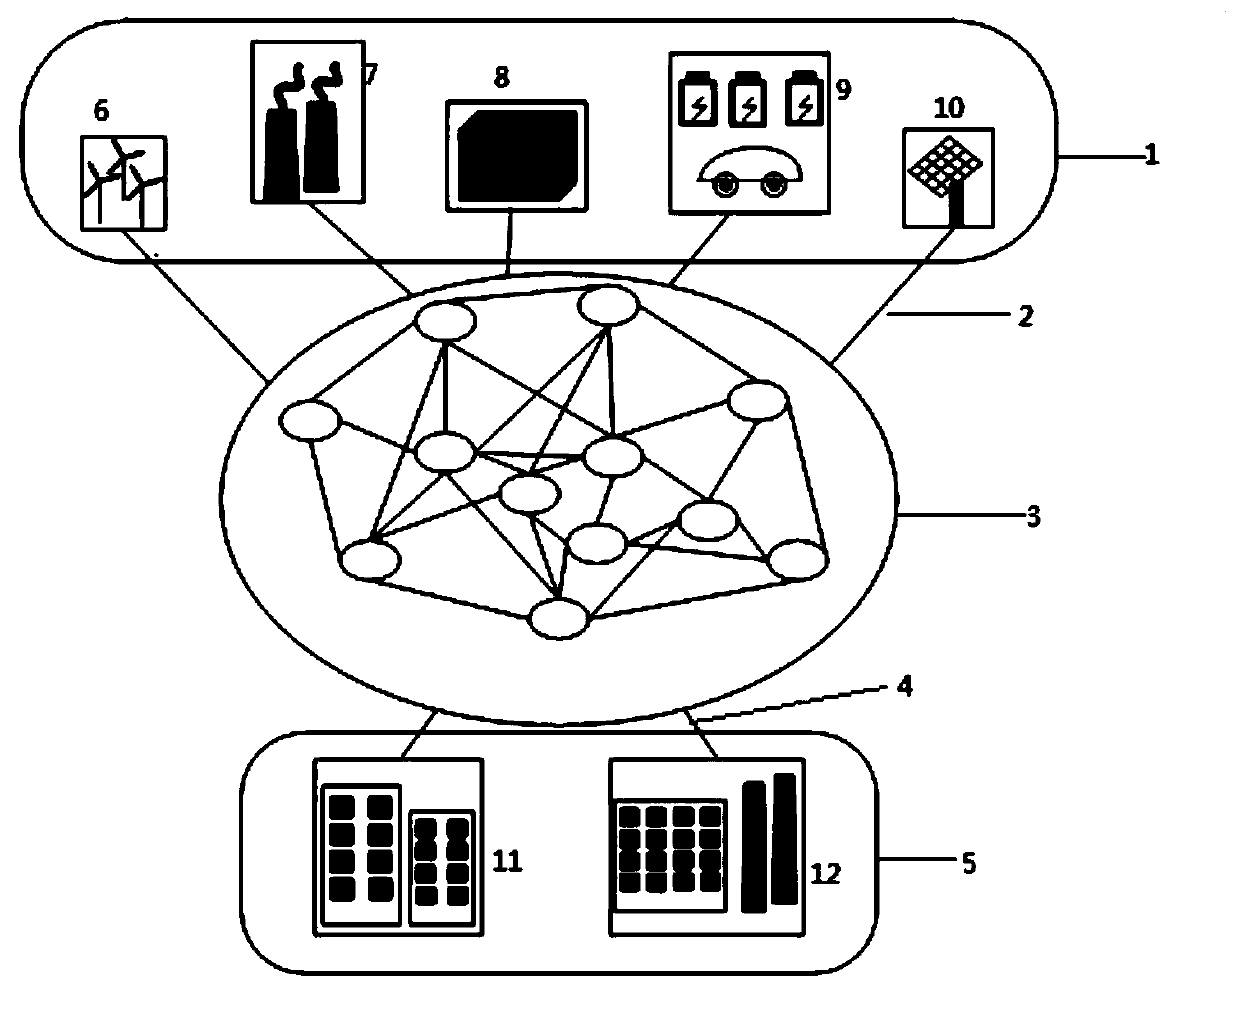 Virtual power plant internal market transaction method and system based on alliance block chain